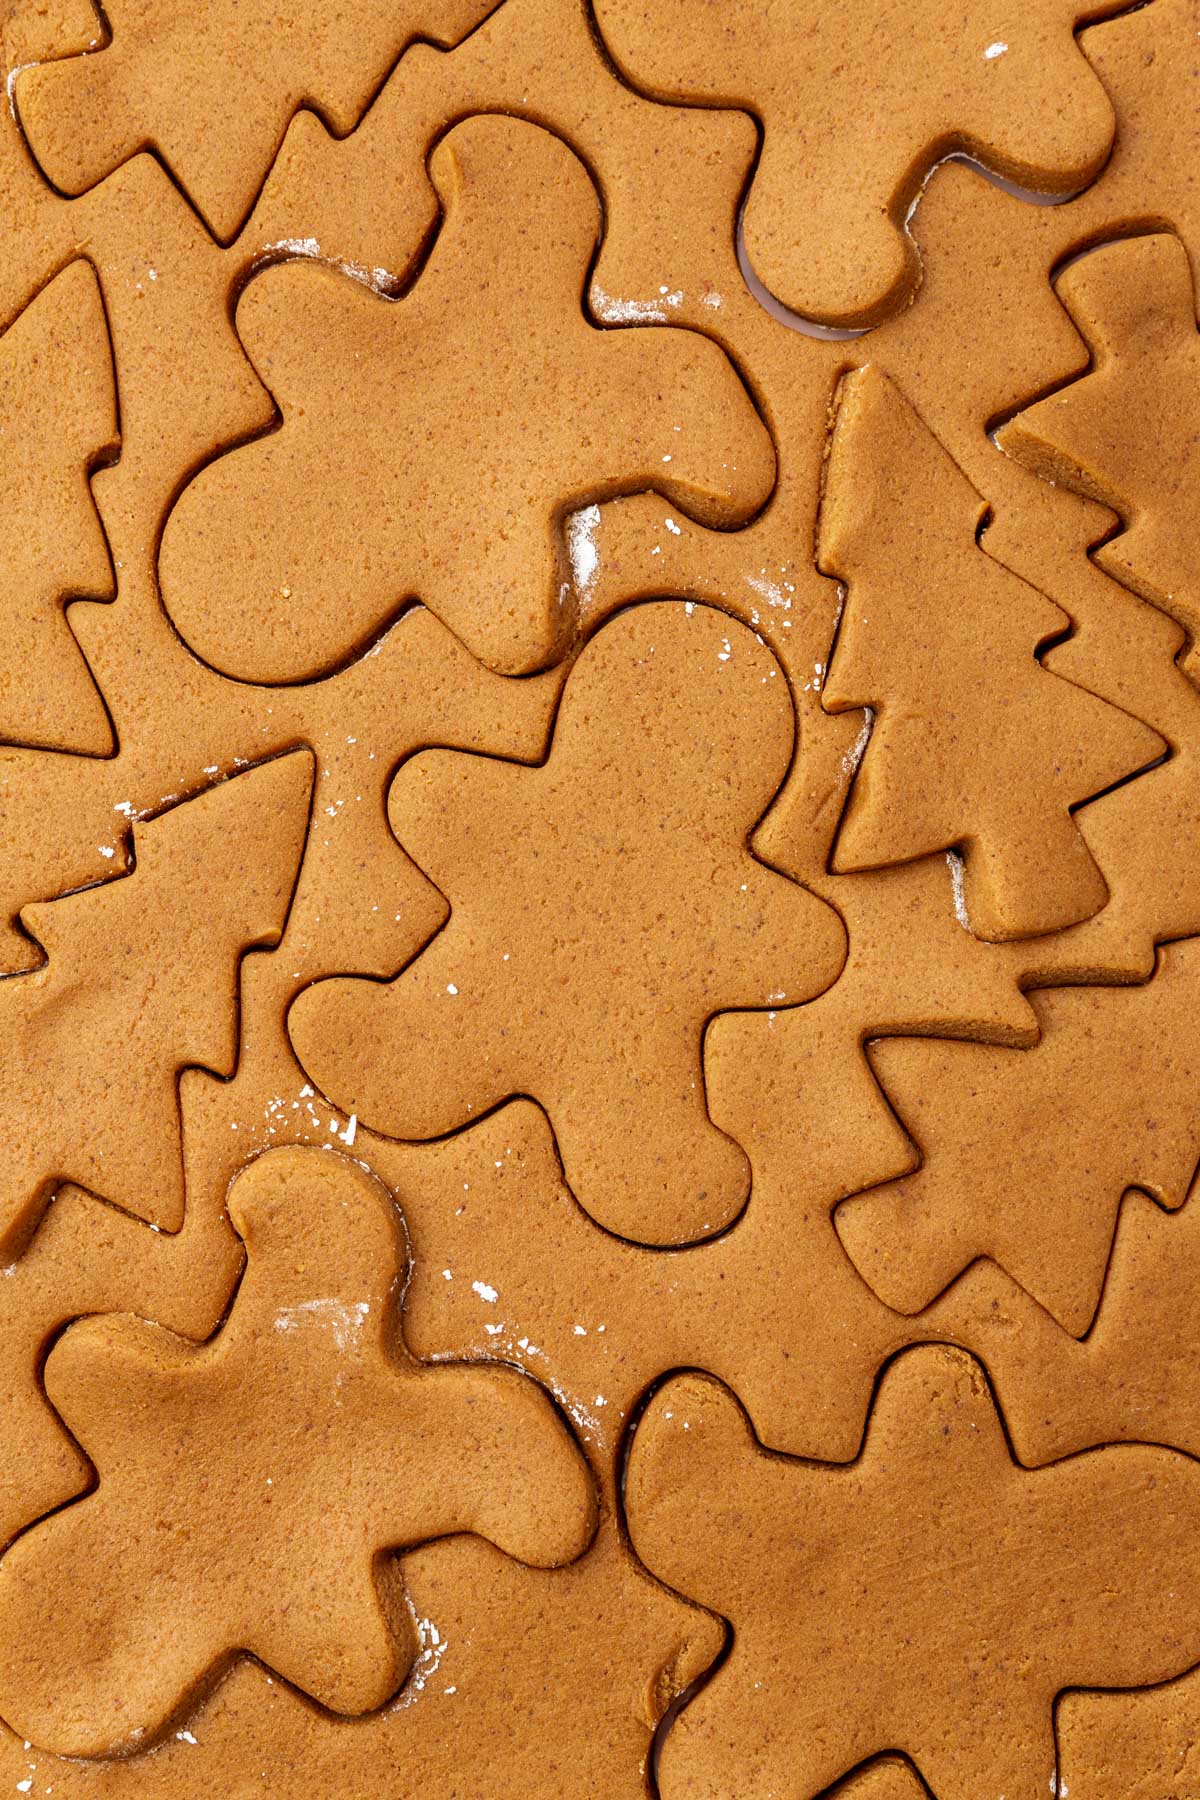 Gluten-free gingerbread cookie dough rolled out on parchment paper with gingerbread men and Christmas trees cut out of them.